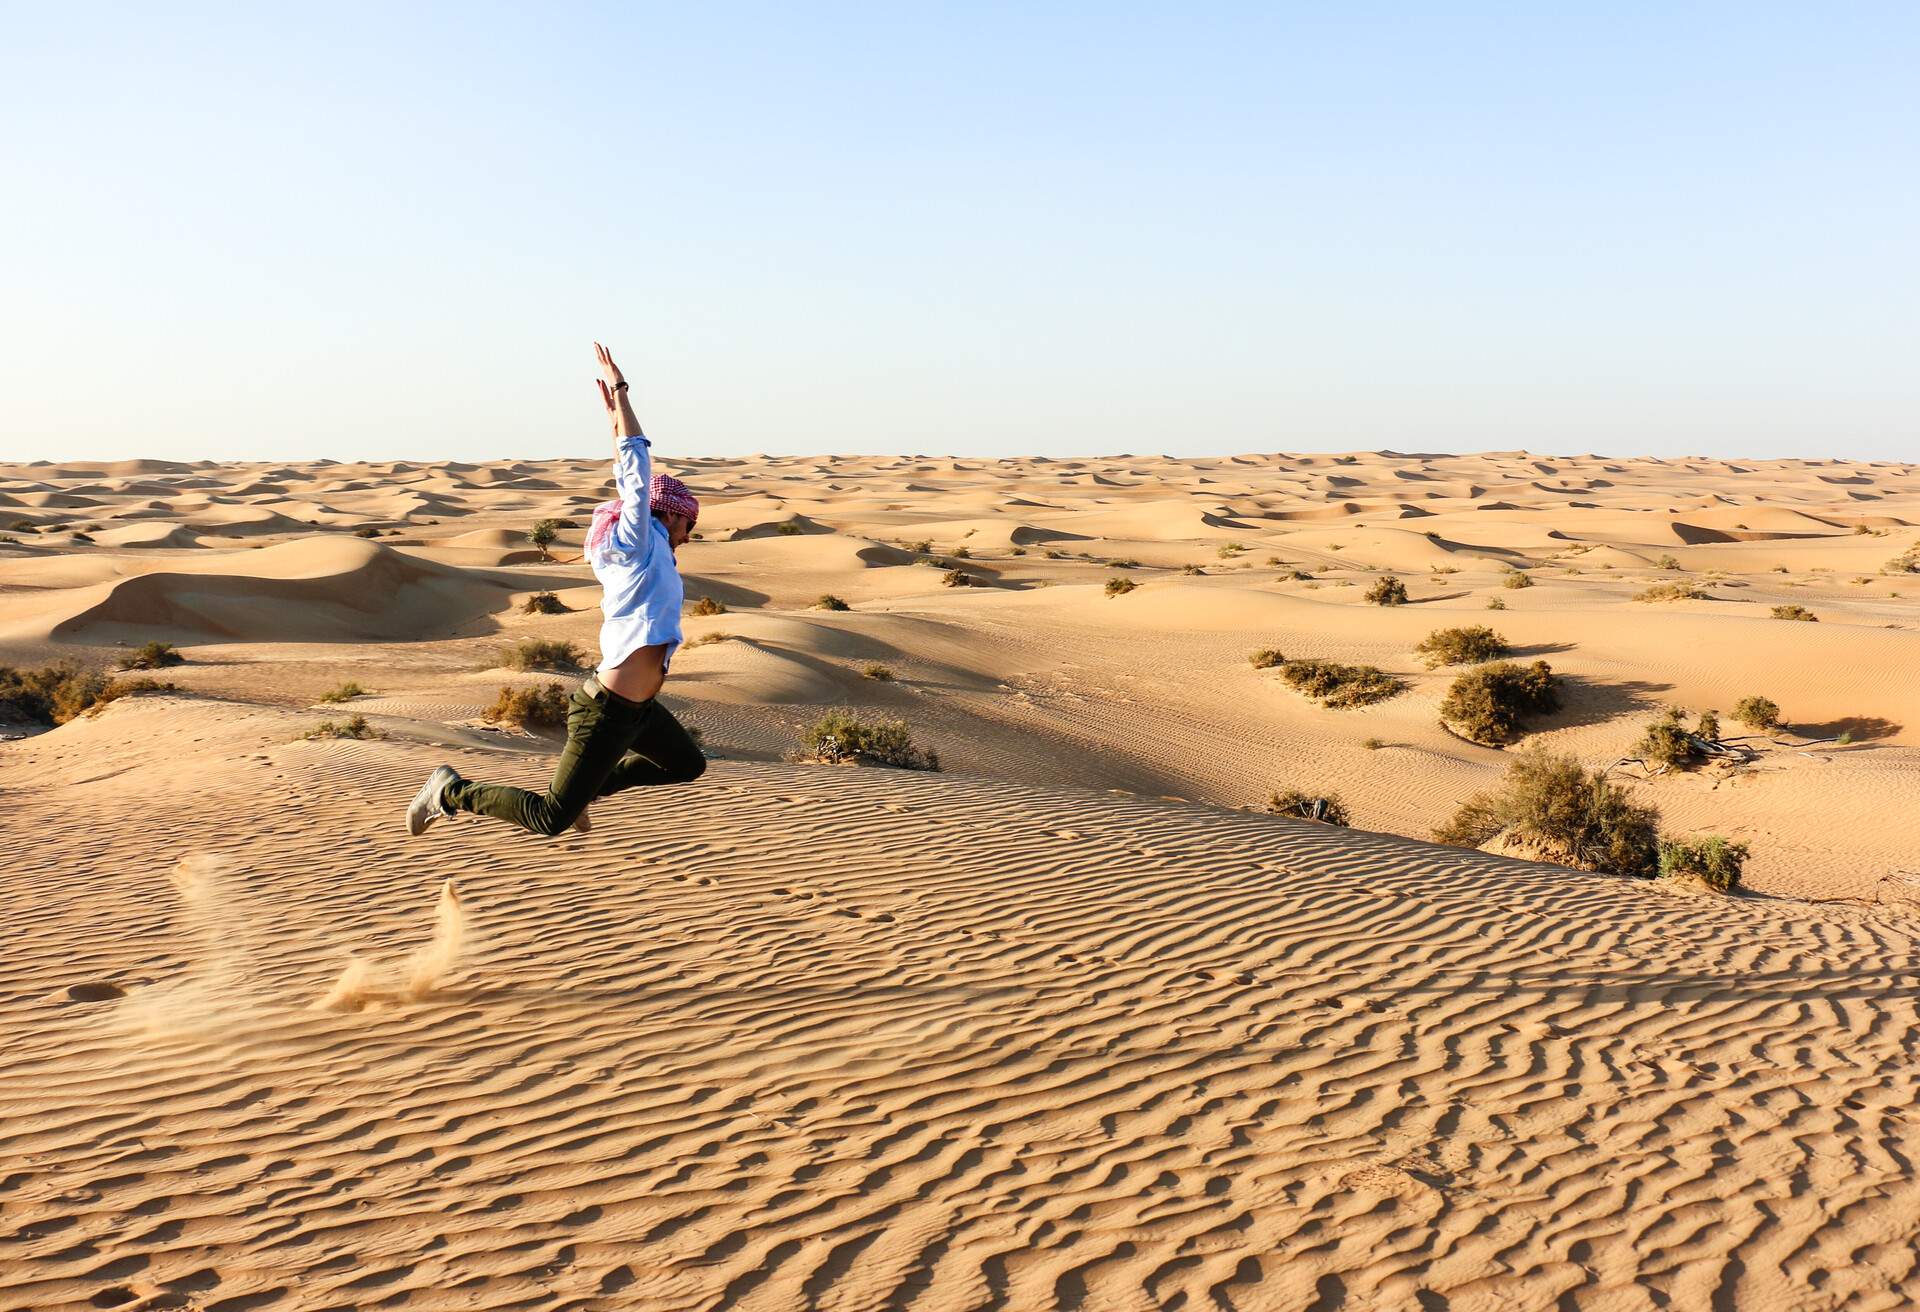 A male tourist jumps with raised hands in the middle of the desert.